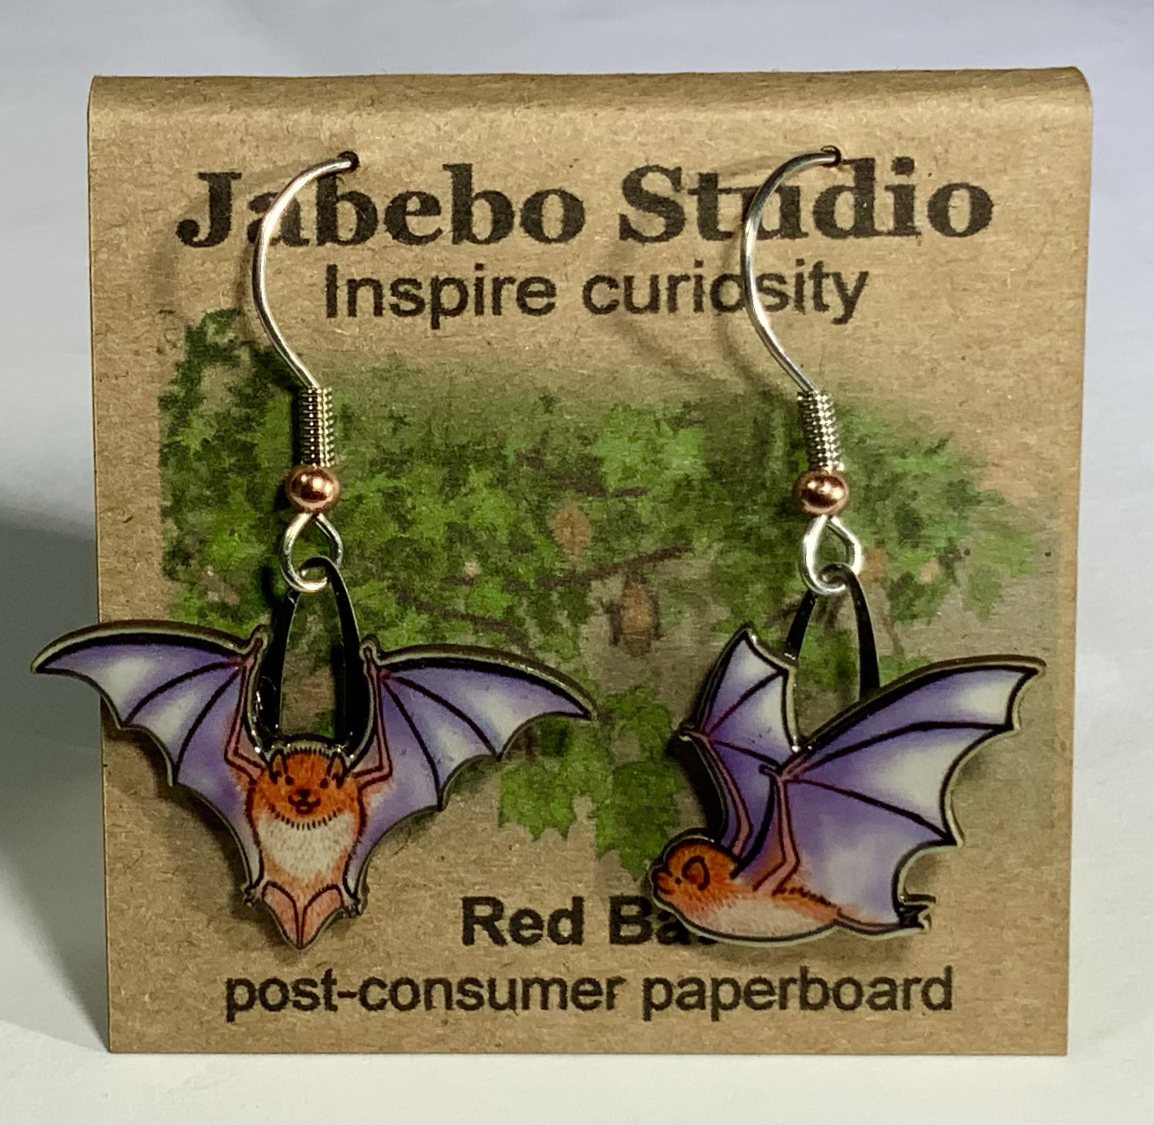 Picture shown is of 1 inch tall pair of earrings of the animal the Red Bat.